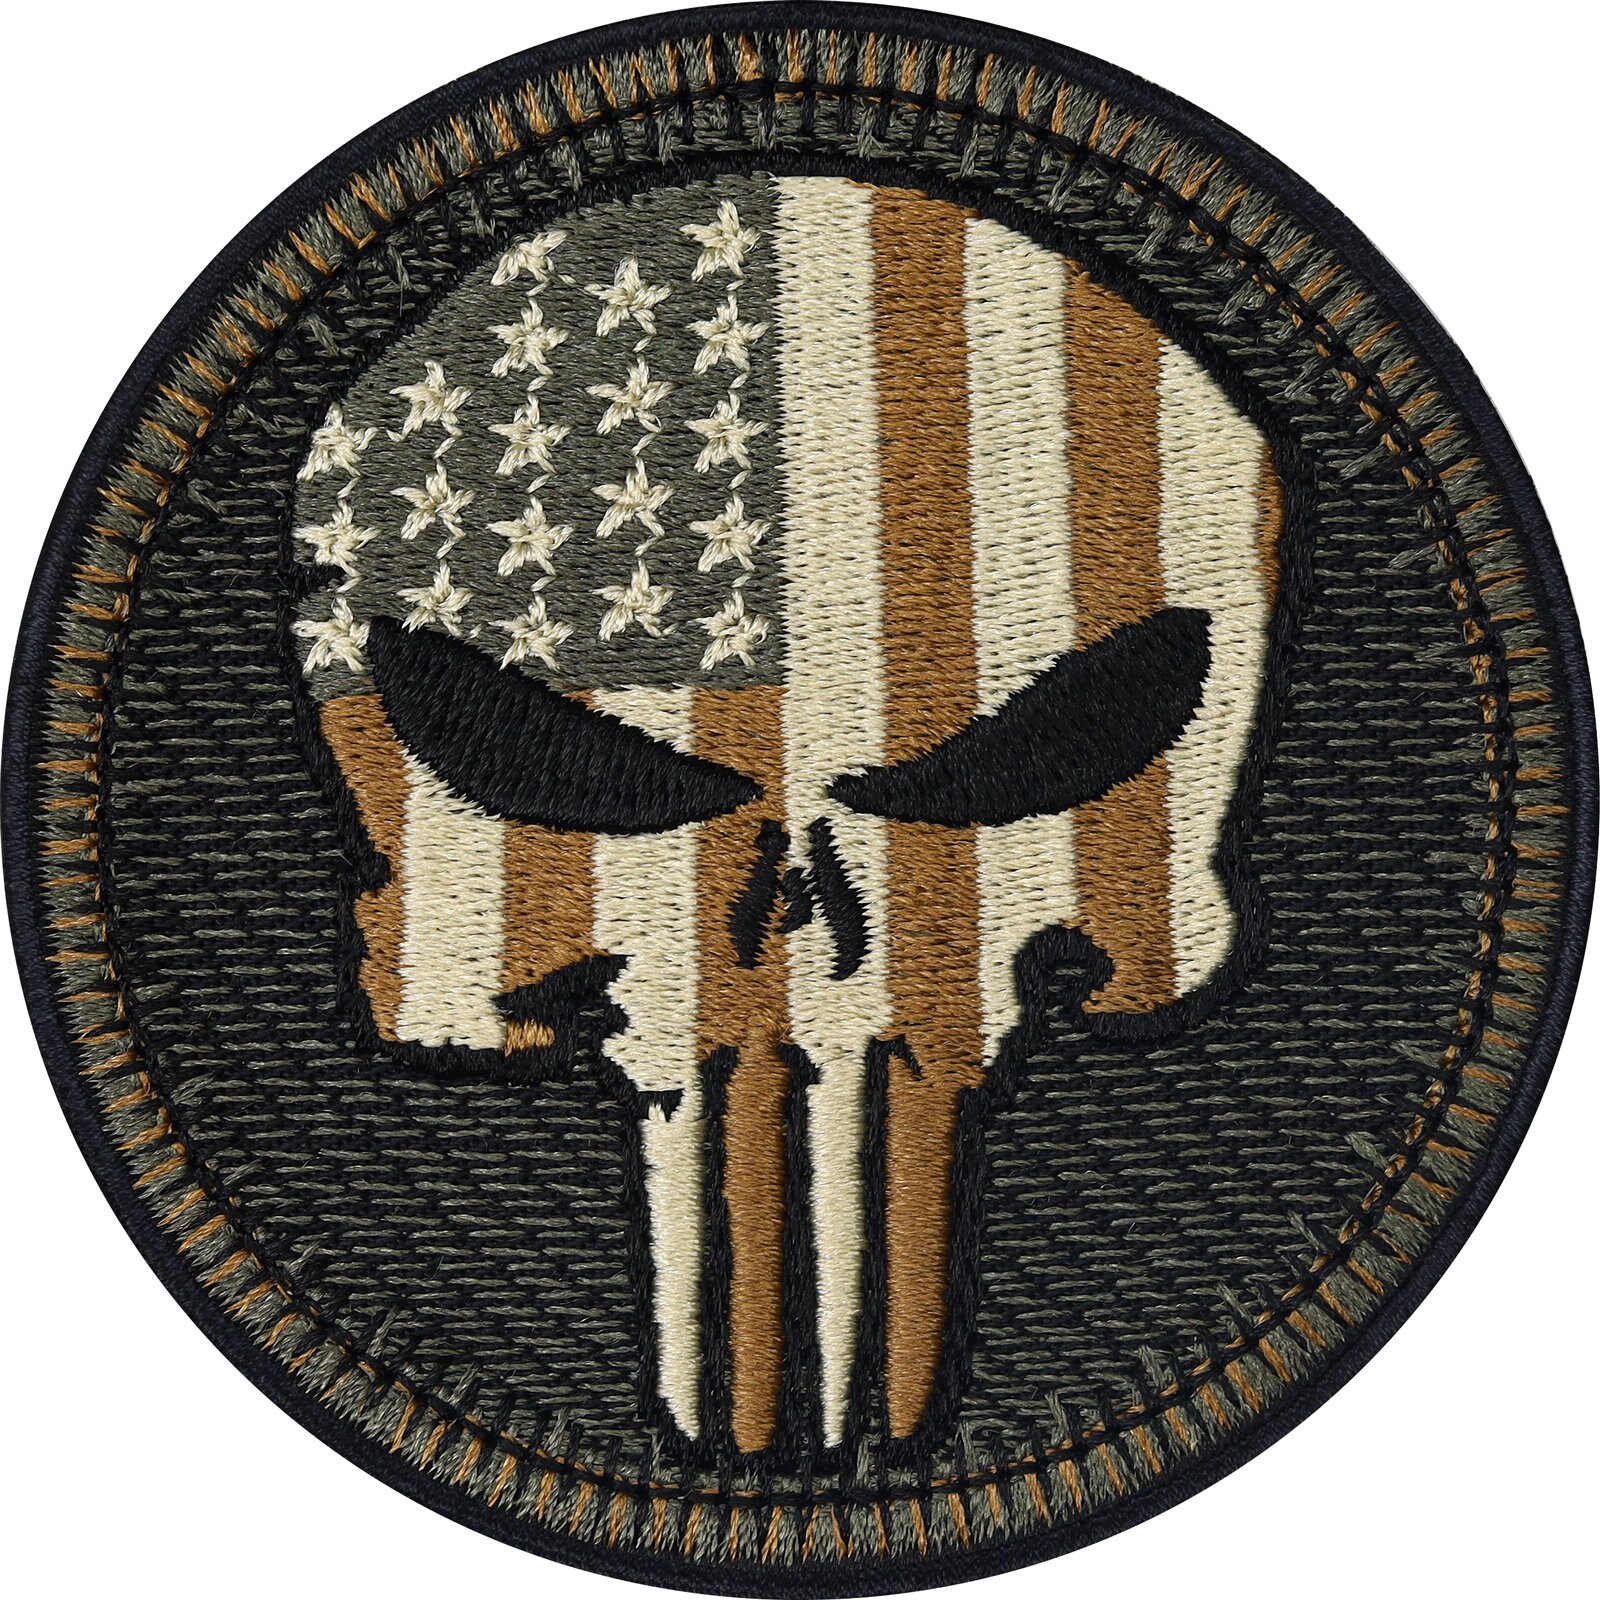 Embroidered Iron On Patch for Punisher Skull-Shaped Patch Toothy Skull  Patch Skull Patch with Red Eyes Biker Stripes on The Jacket Iron On Patch  Pride